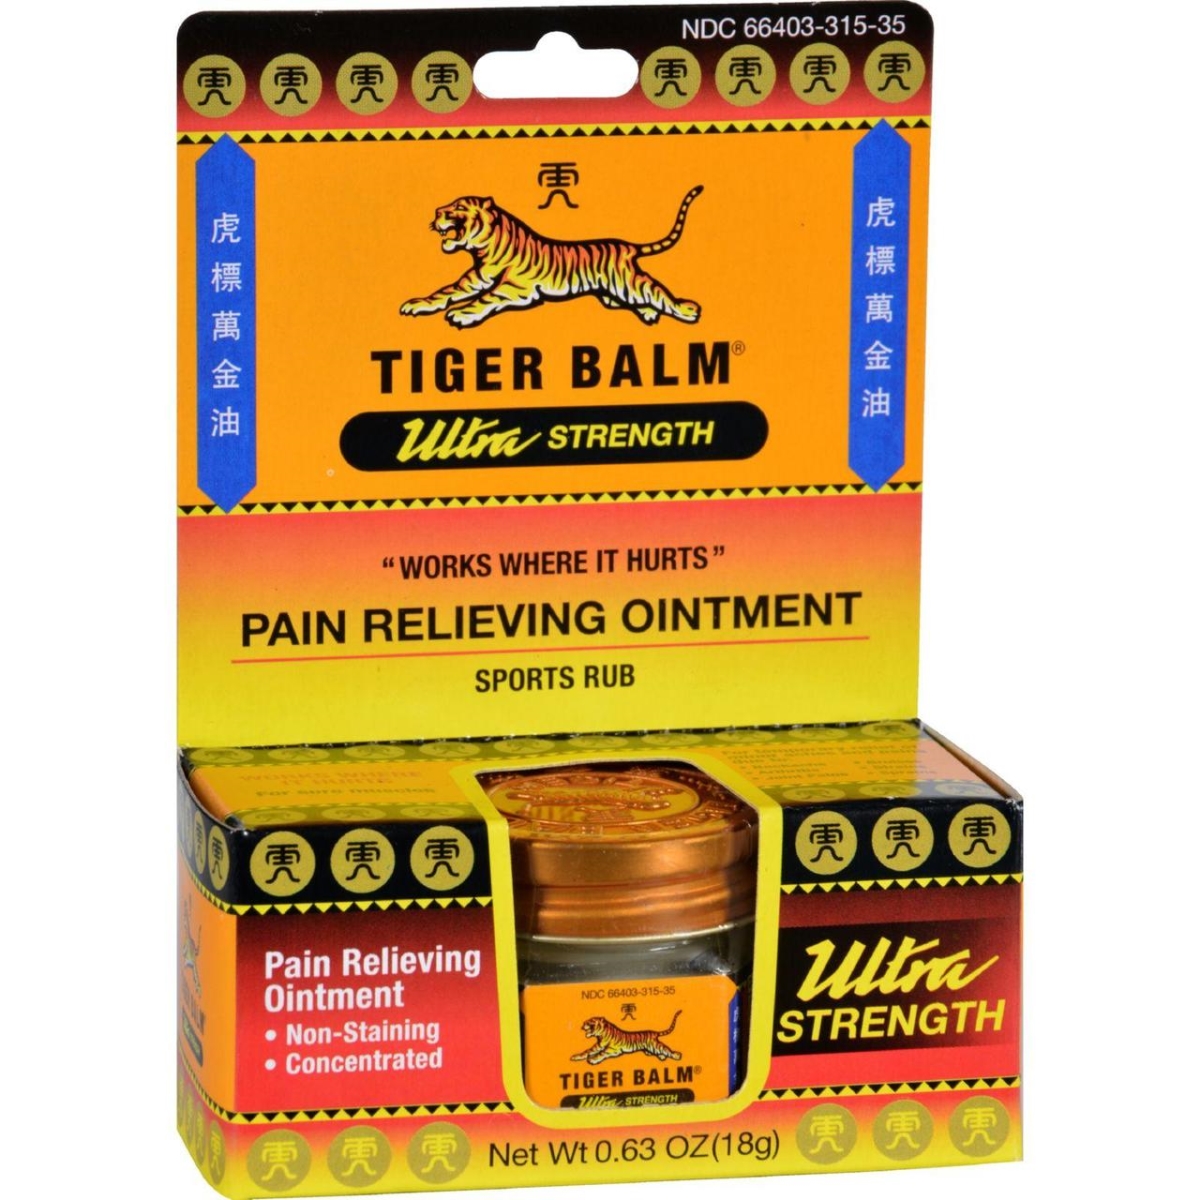 Hg0926576 0.63 Oz Ultra Strength Pain Relieving Ointment